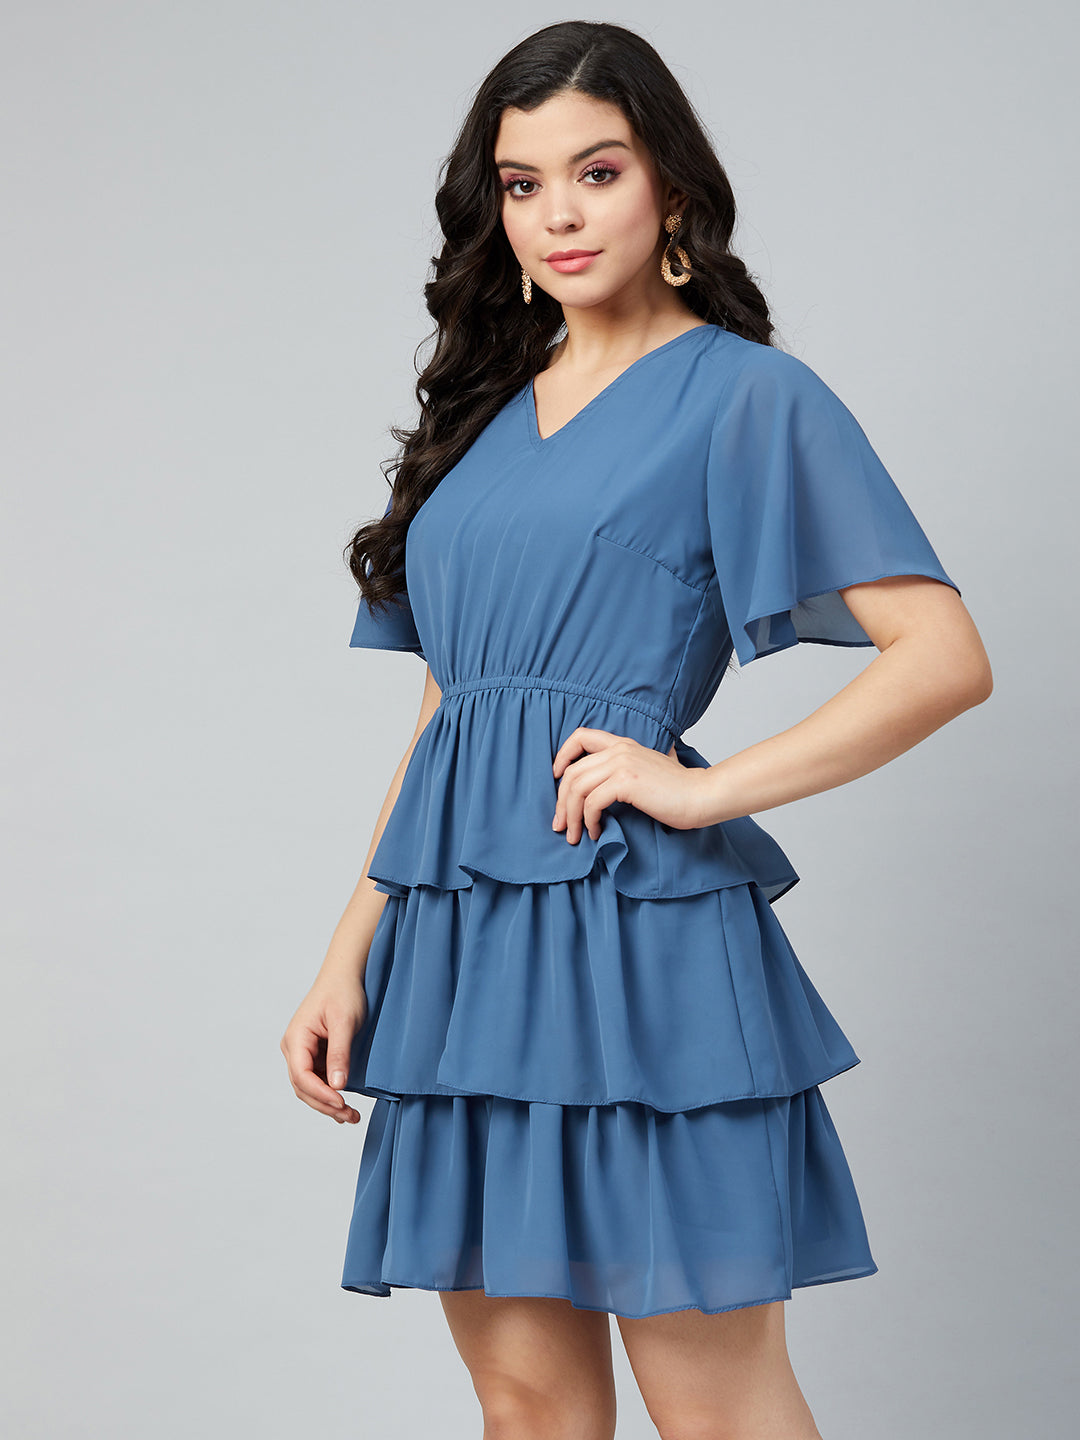 Athena Women Blue Solid Fit and Flare Dress - Athena Lifestyle